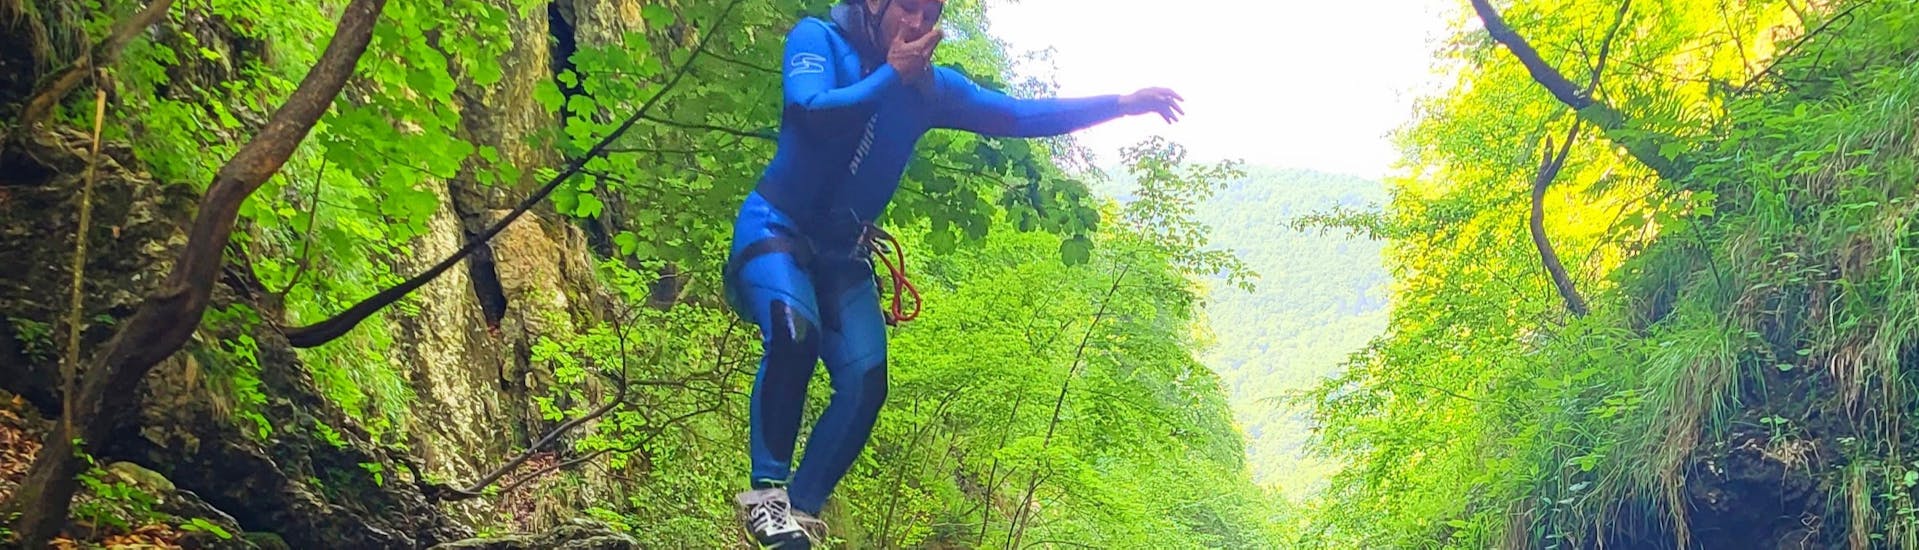 A participant jumping in the water during Canyoning in the Sušec Gorge near Bovec.